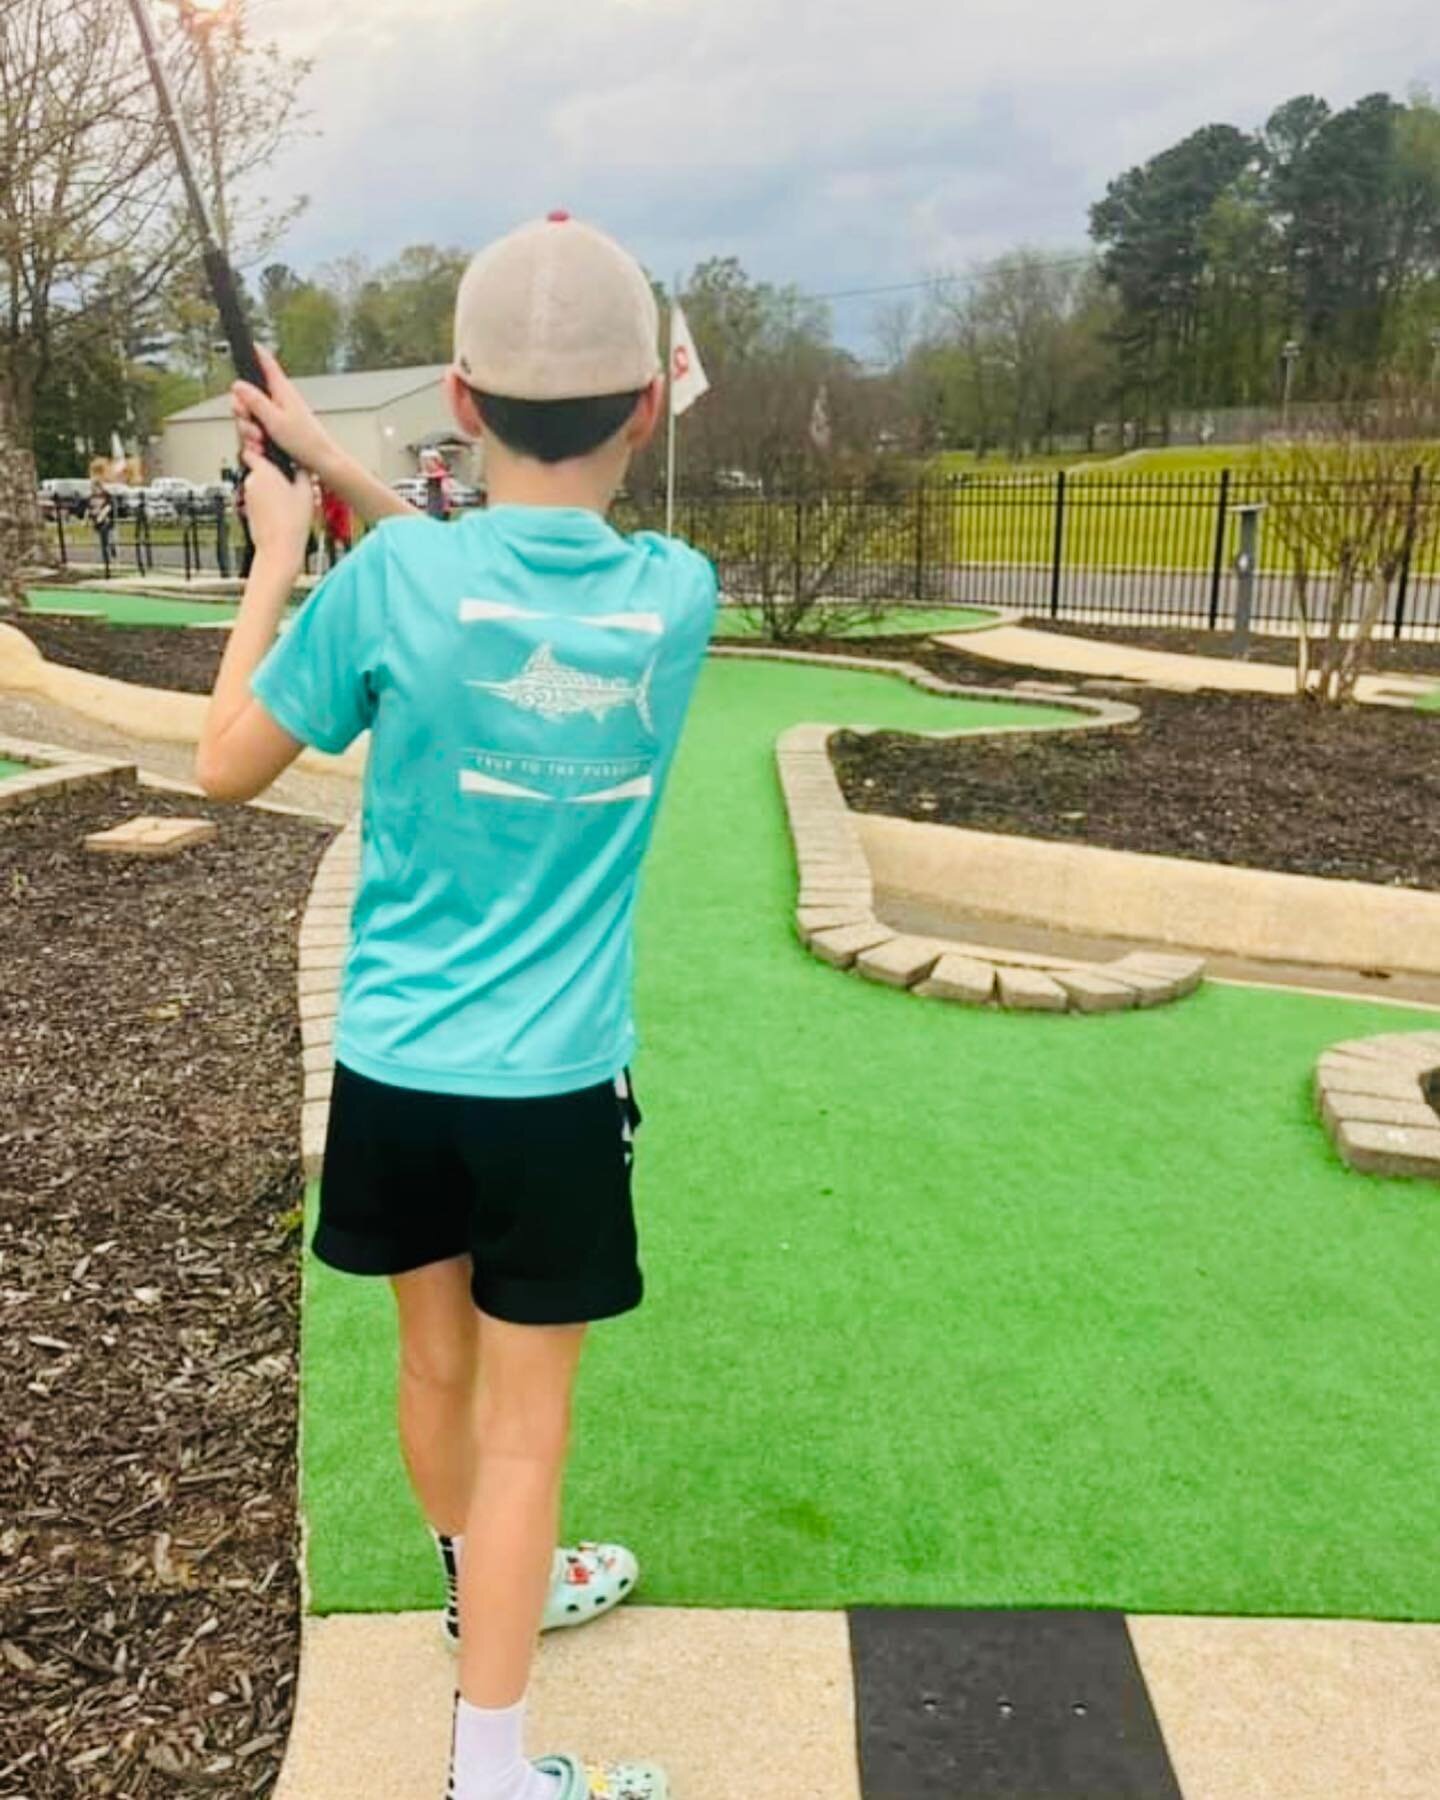 Now open weekdays after school. (3 pm - 7 pm on Tuesdays - Thursdays) Take advantage of the discounted weekday admission price! ⛳️